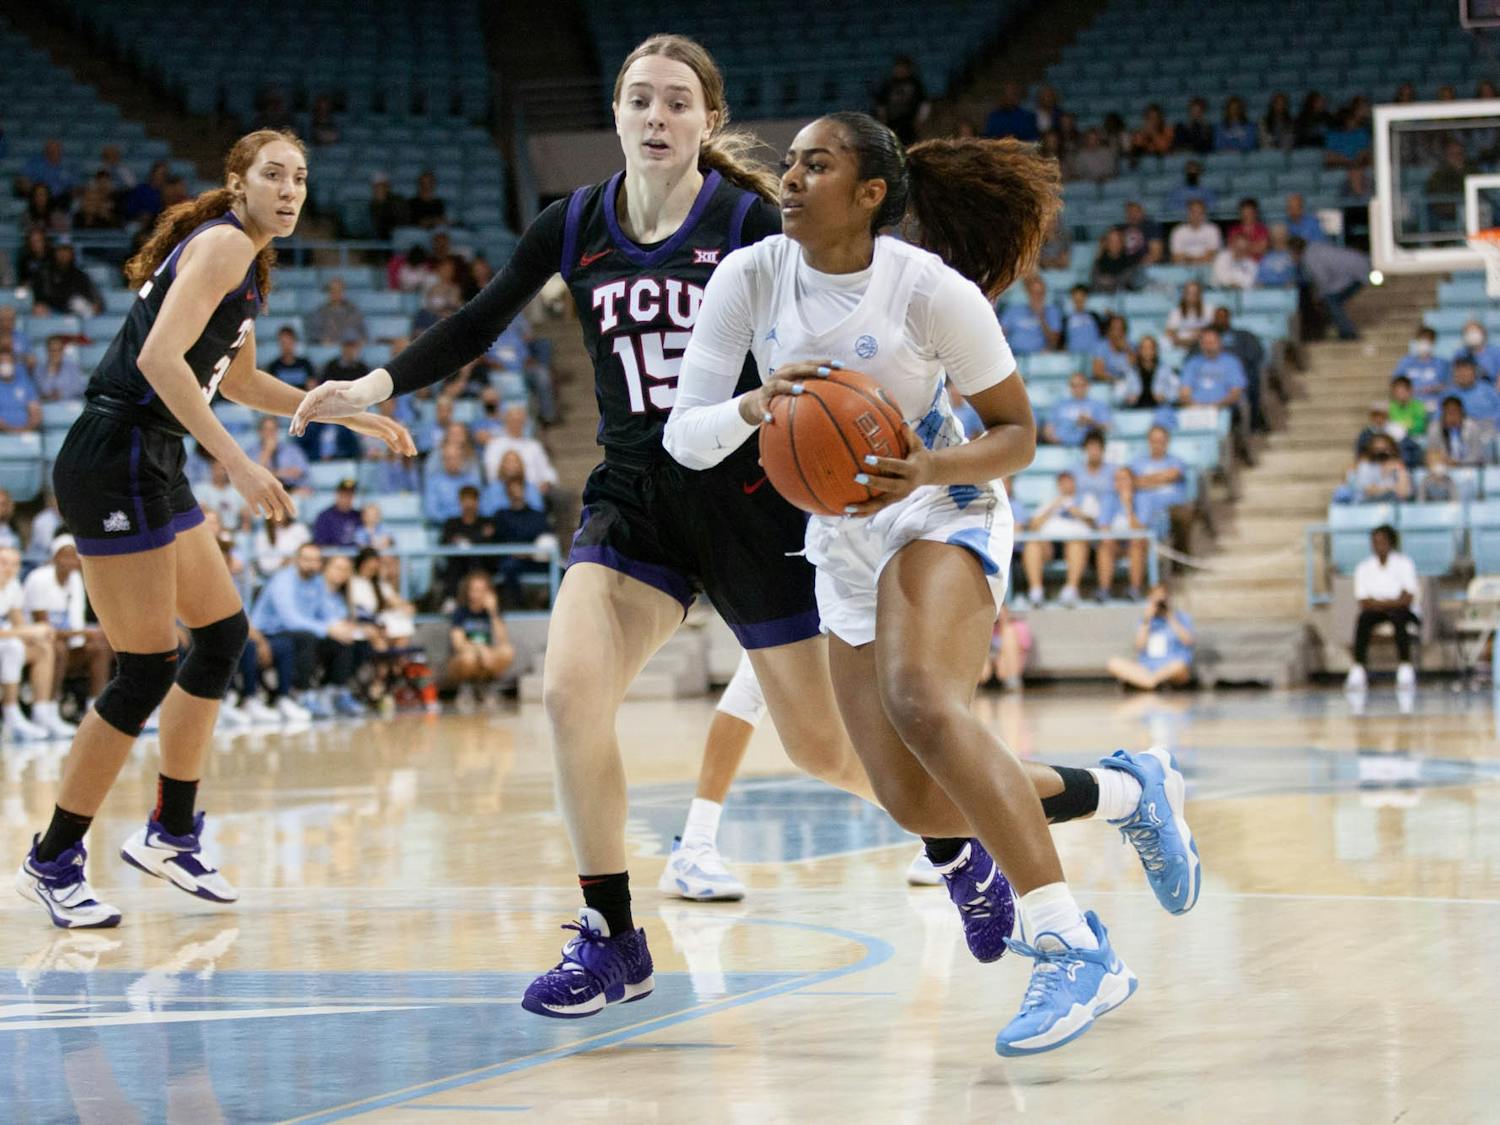 UNC Junior Guard Deja Kelly (25) drives into the lane versus TCU on Saturday, Nov. 11, 2022, at Carmicheal Arena. The Tar Heels are winning 30-24 at the half.